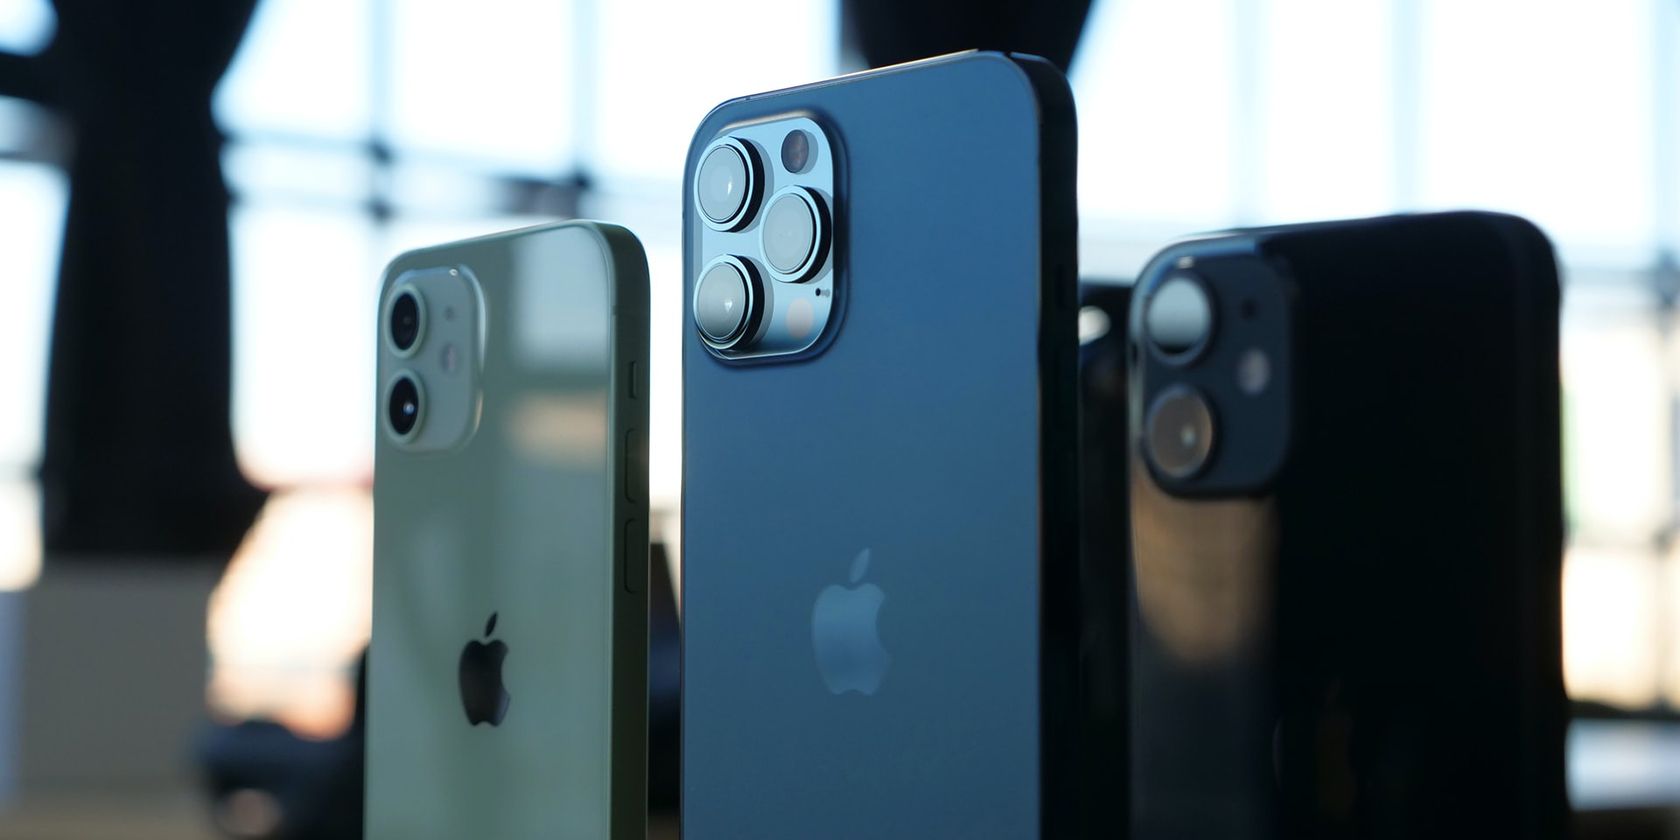 iPhone 12 and iPhone 12 Pro lineup.